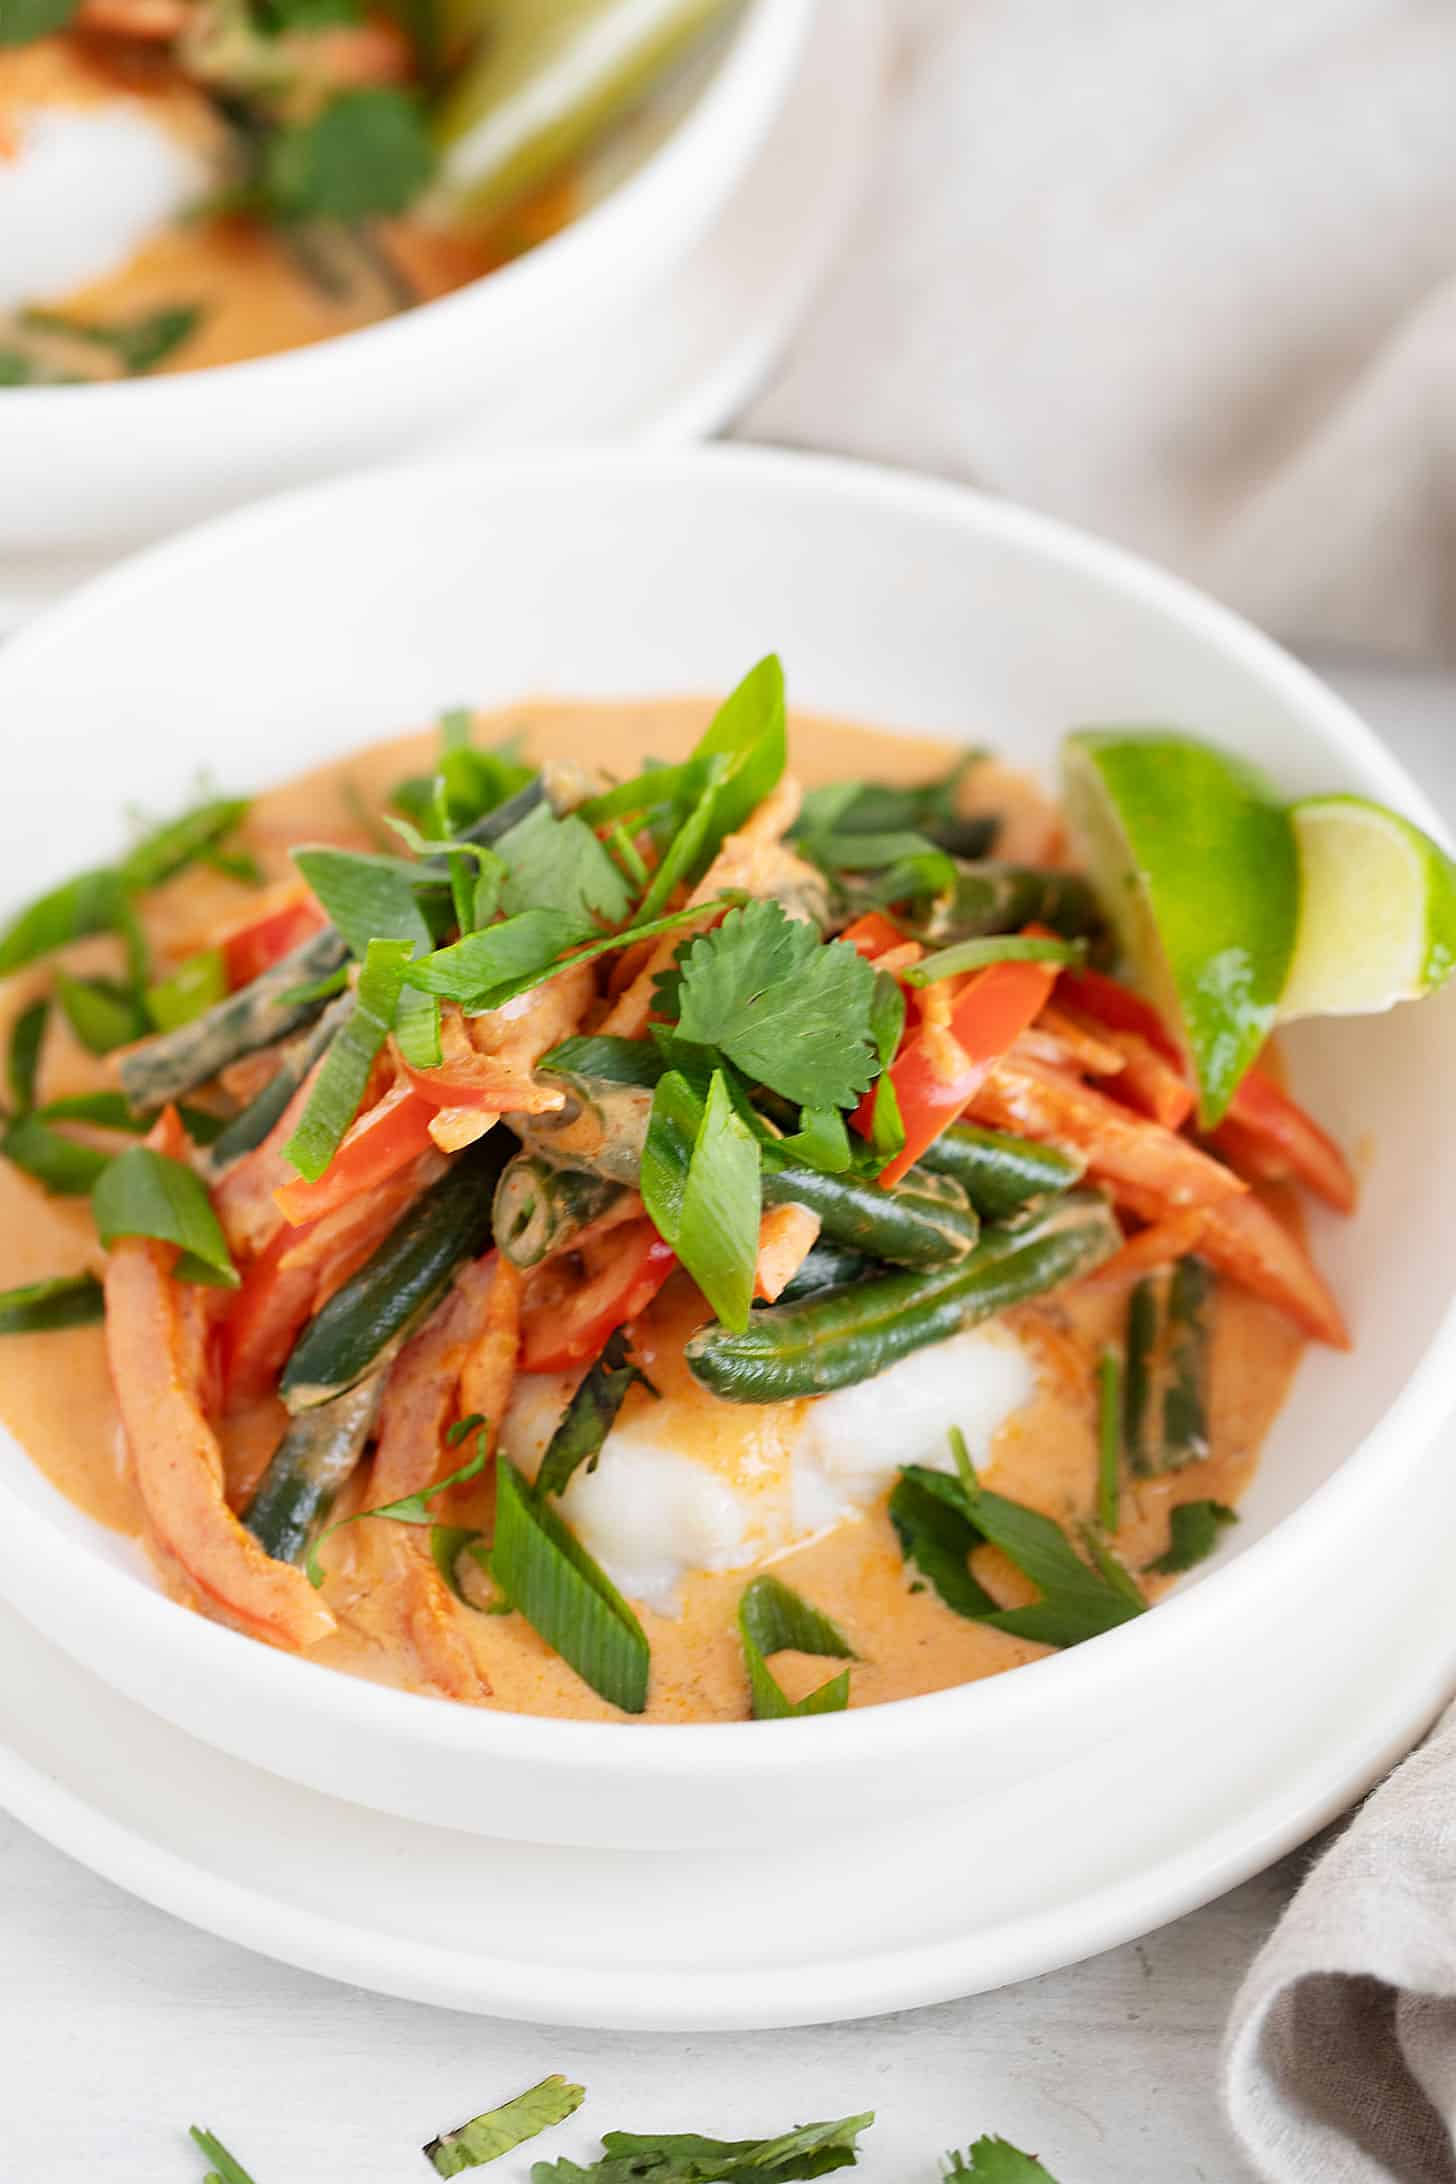 Thai red curry fish in bowls